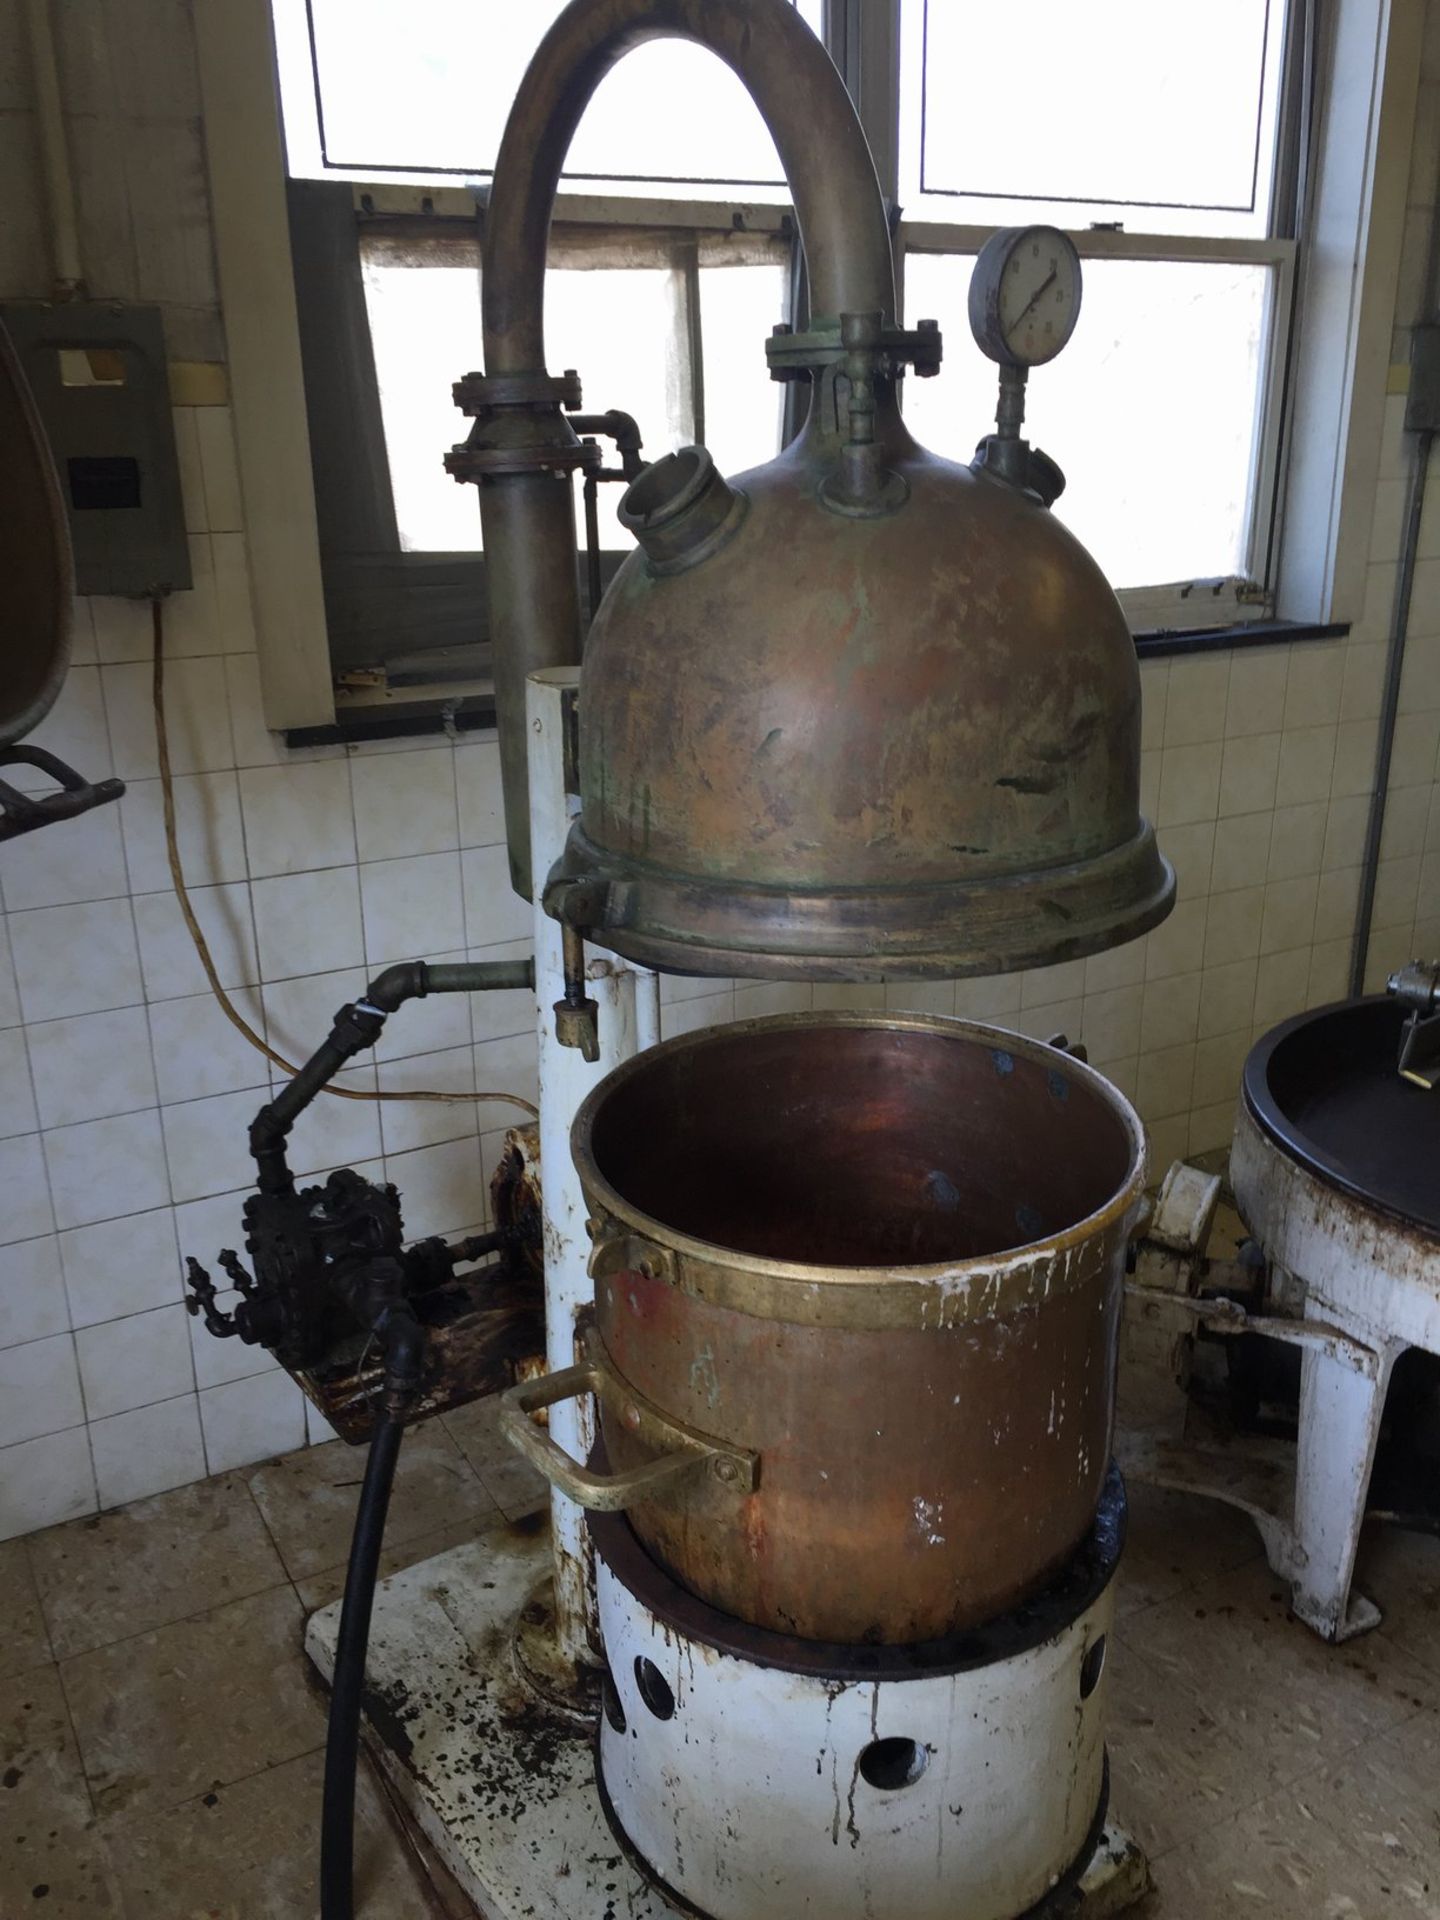 Simplex Gas Fired Vacuum Hard Candy Cooker with copper dome and pot, vacuum pump missing burner - Image 2 of 3